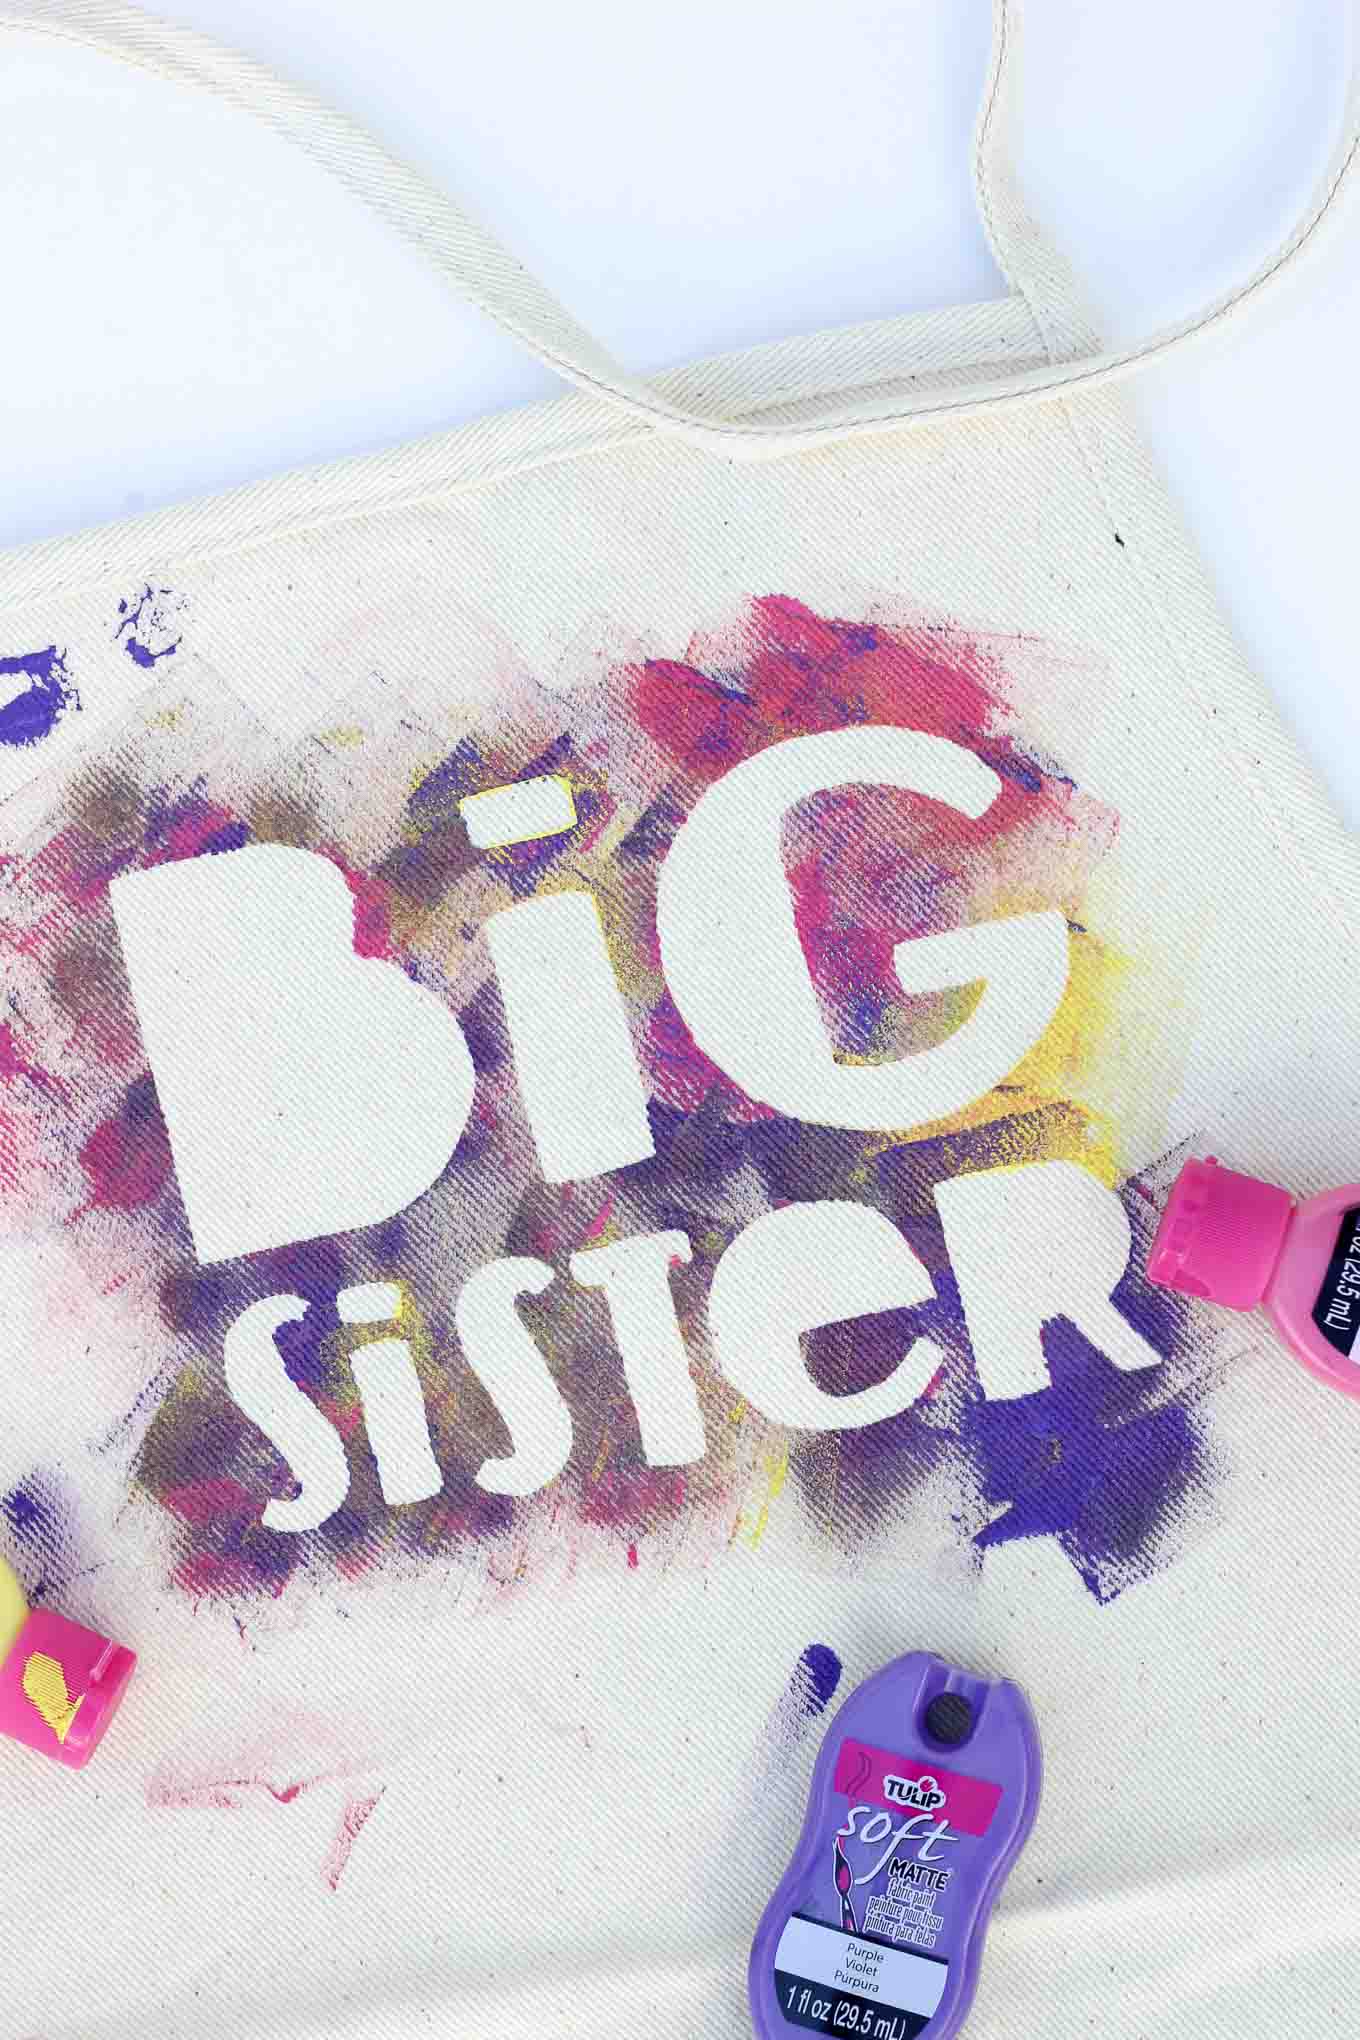 This easy kids craft is an awesome way to prepare older siblings for their new role as the “helper” in the family before a new baby arrives. The DIY apron also makes a great big brother / big sister gift idea kids can make themselves. Free template! | MakeAndDoCrew.com